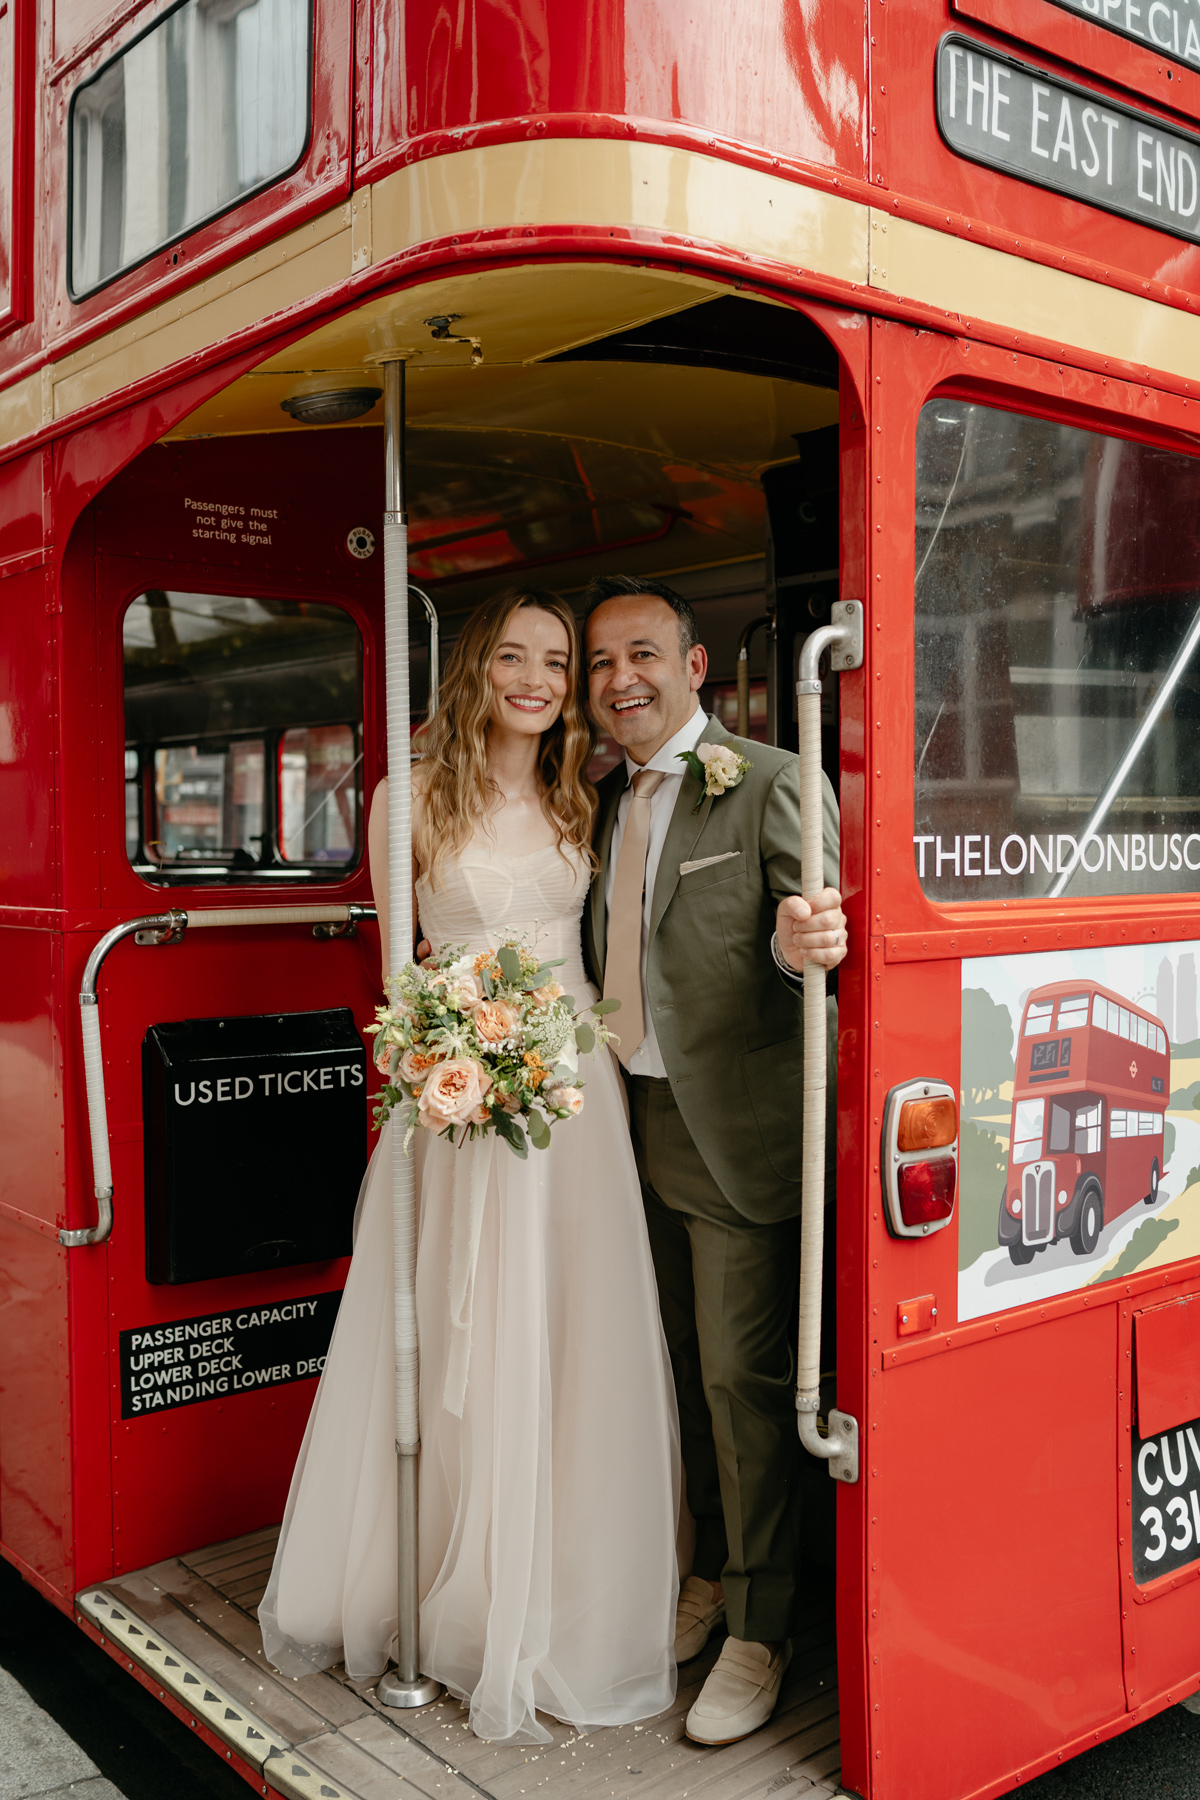 Stylish London wedding photography couple portrait with red double decker